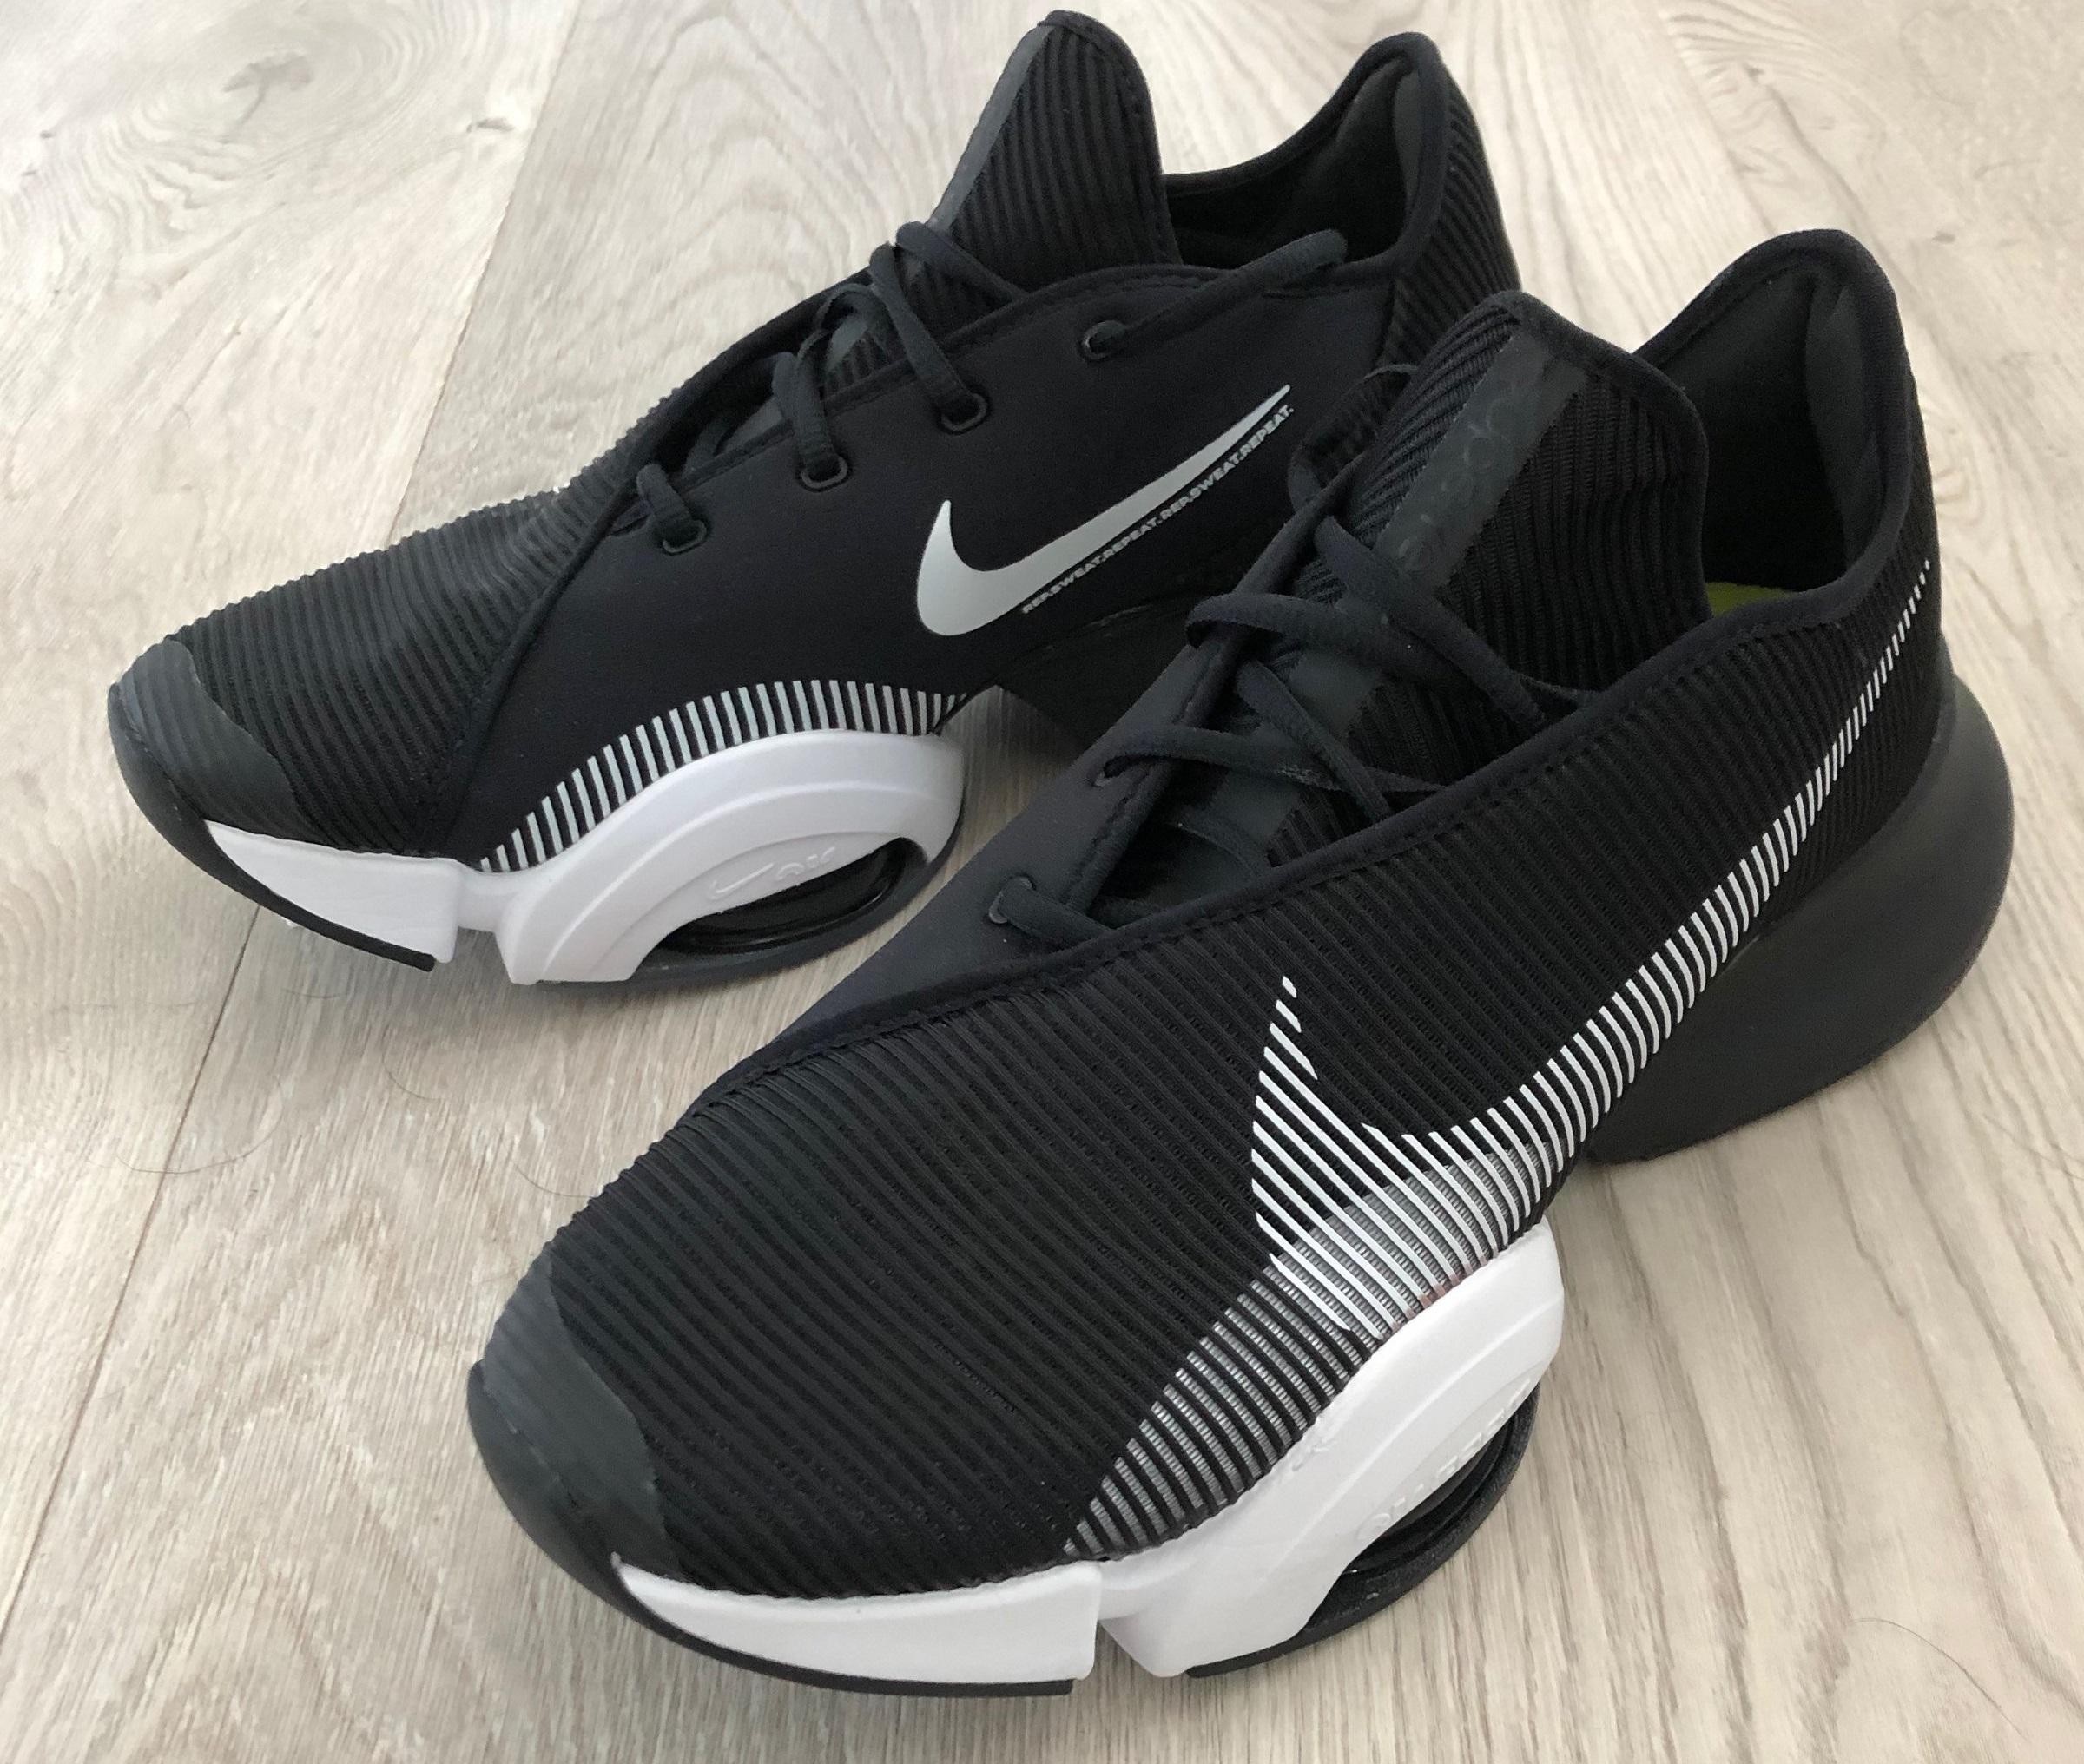 Nike Air Zoom SuperRep 2 Review, Facts, Comparison | RunRepeat